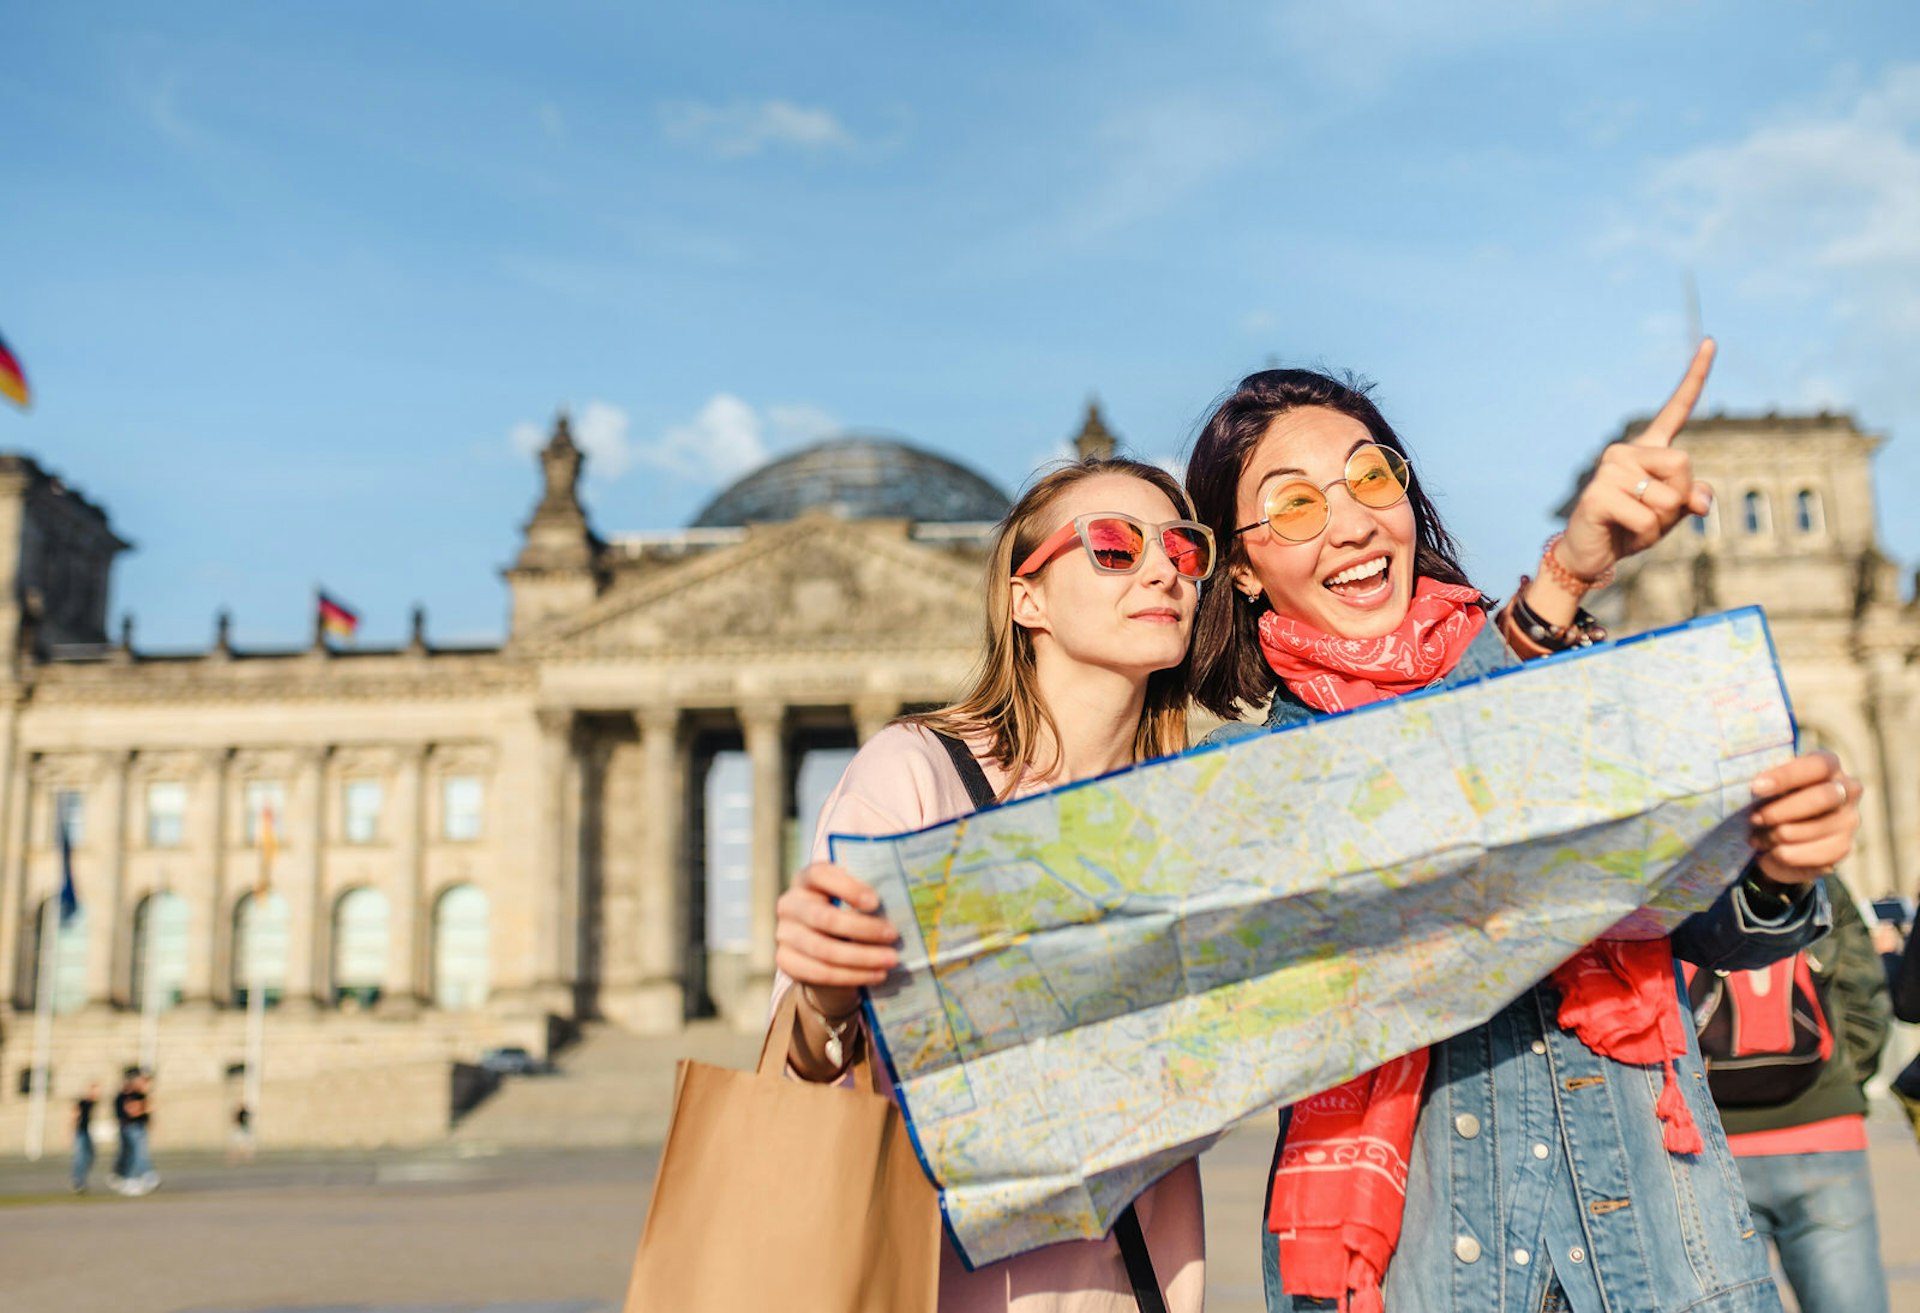 Two women wearing tinted sunglasses and holding a map with the Reichstag building in the background. One woman is pointing beyond the camera. It is a sunny day with a clear blue sky.